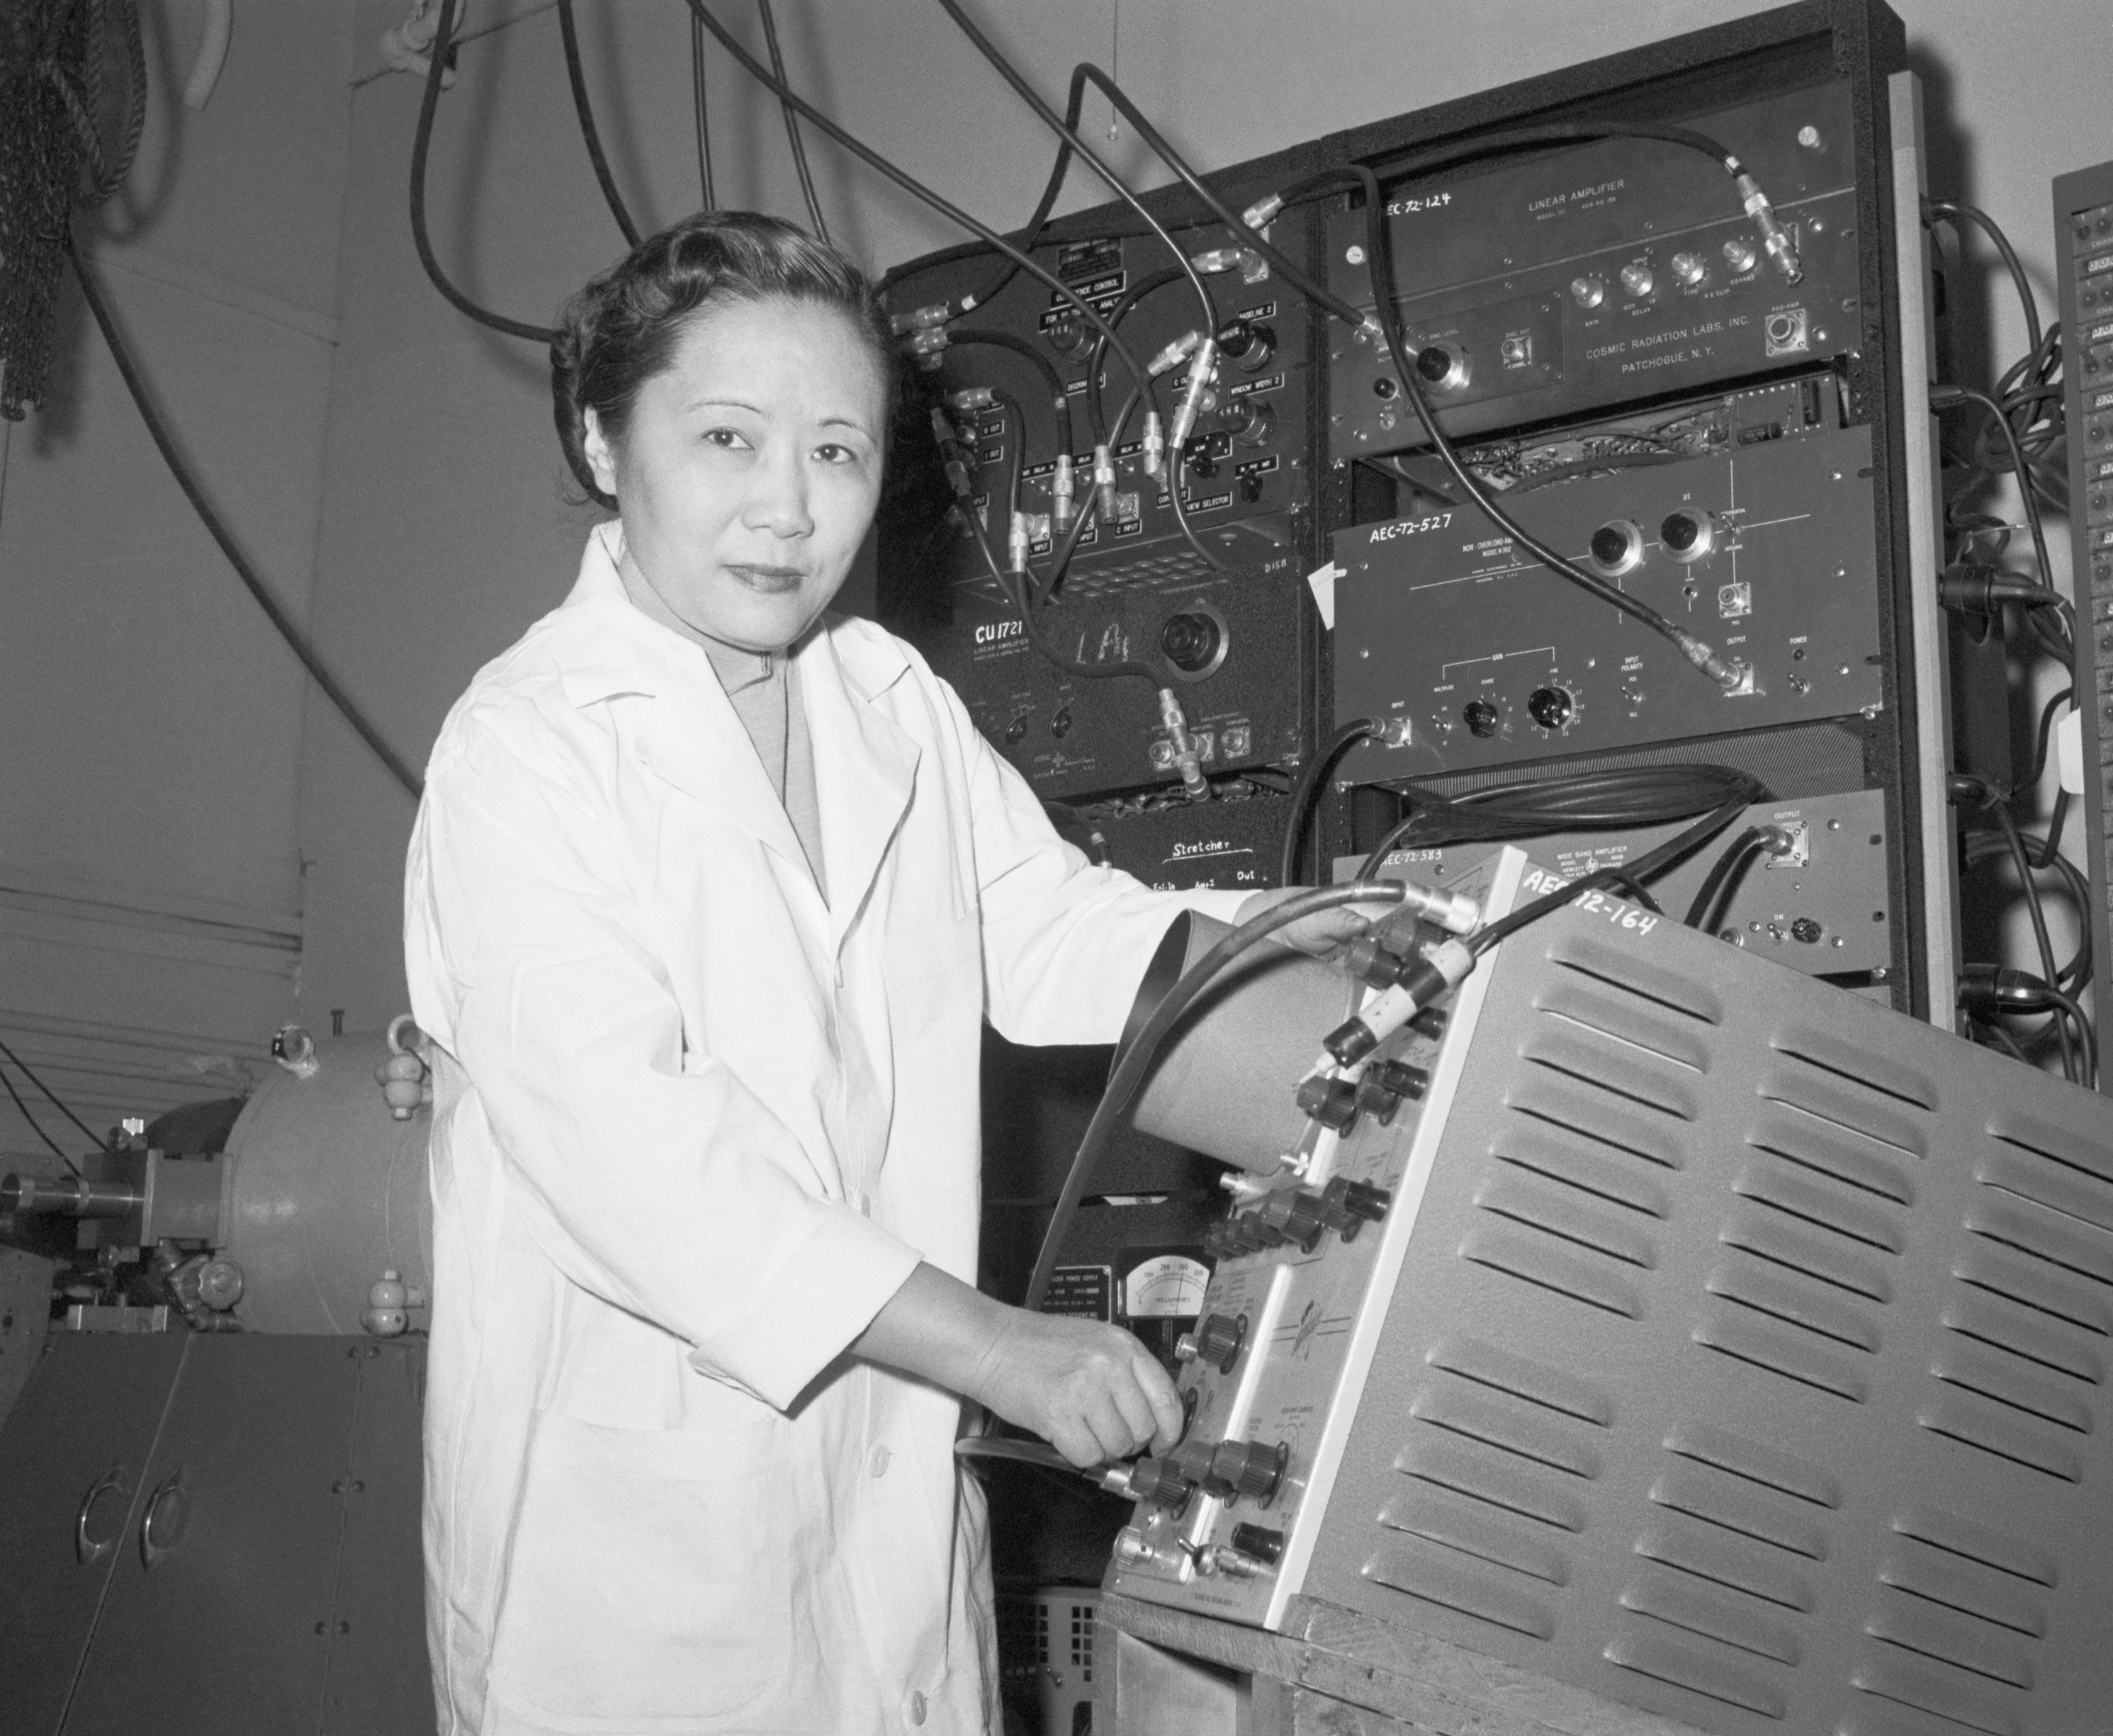 Dr Wu in a lab coat, using lab equipment and looking directly at the camera